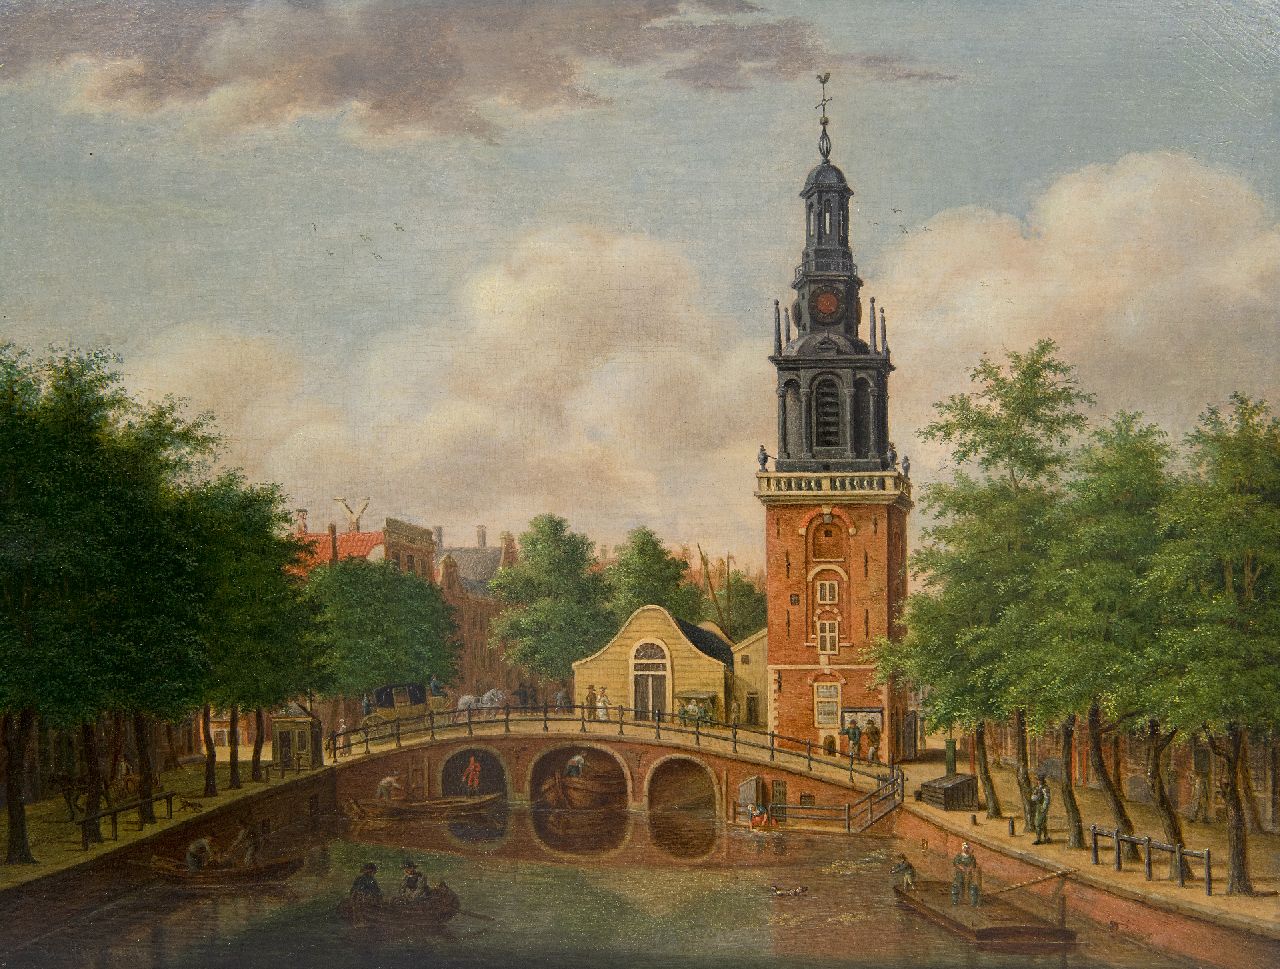 Zijderveld W.  | Willem Zijderveld | Paintings offered for sale | Townscape with canal and tower, oil on panel 25.6 x 33.4 cm, signed l.l. (indistinctly)